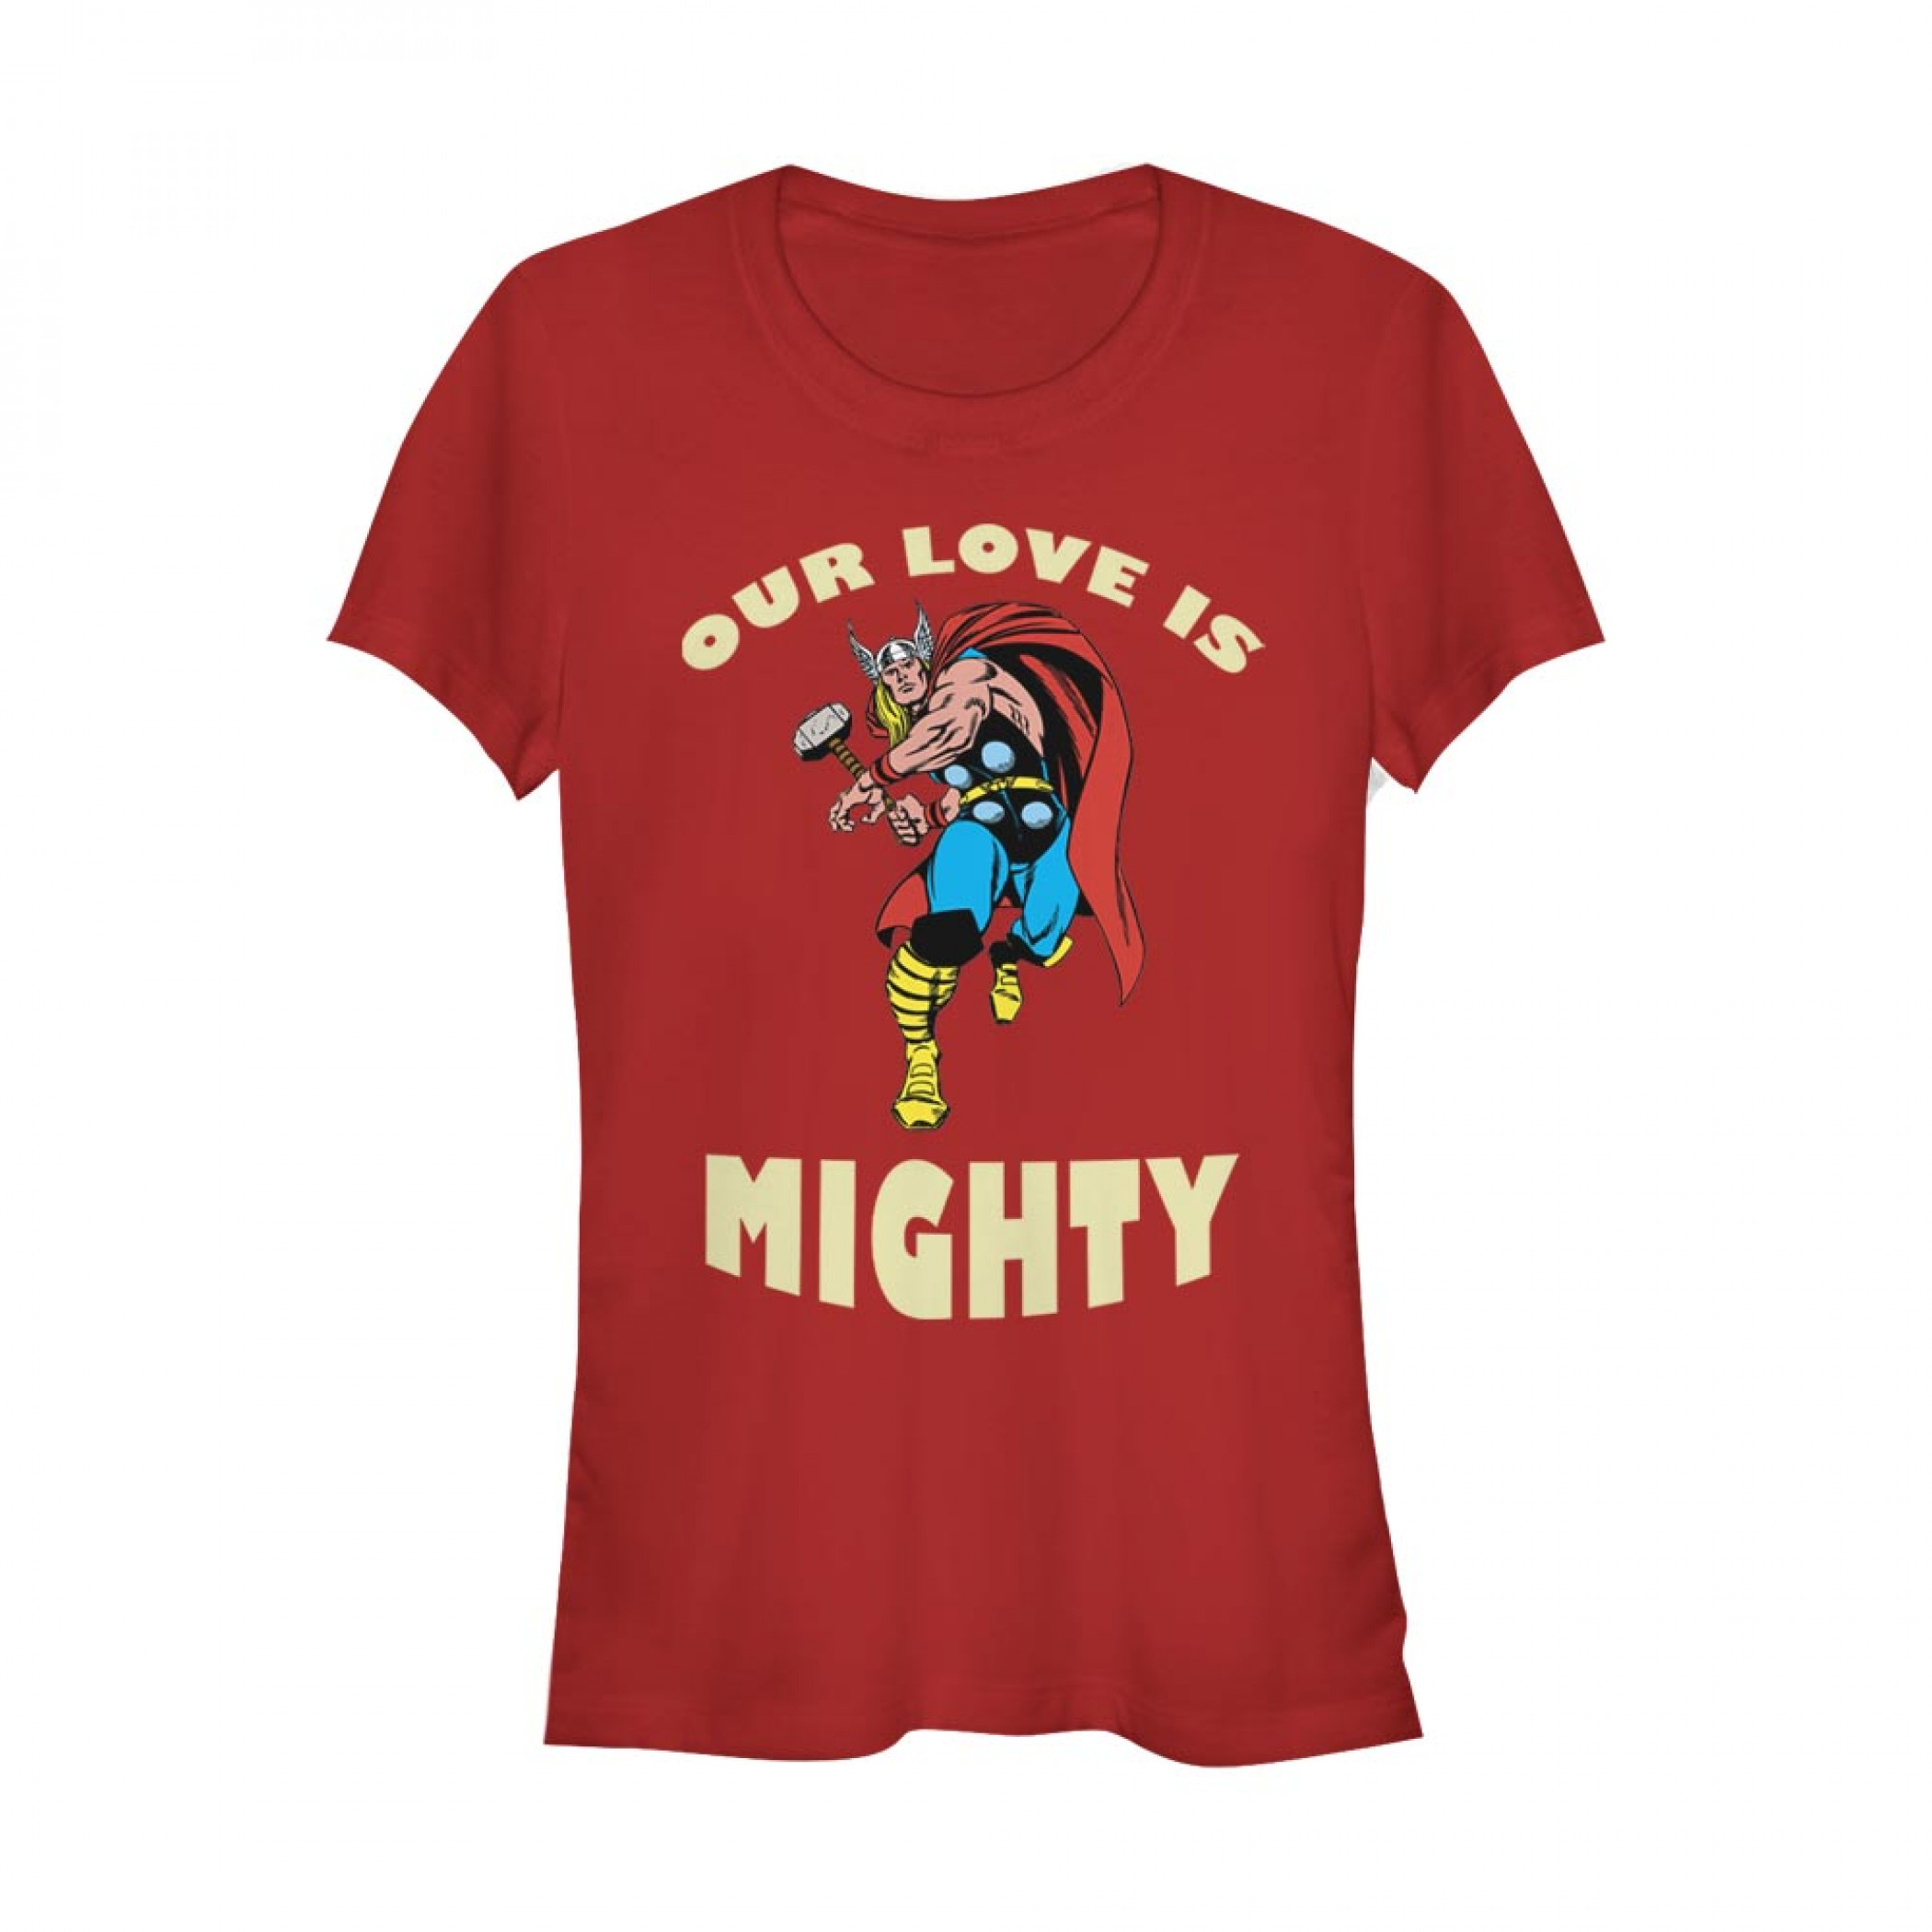 Thor Our Love is Mighty Red Women's T-Shirt